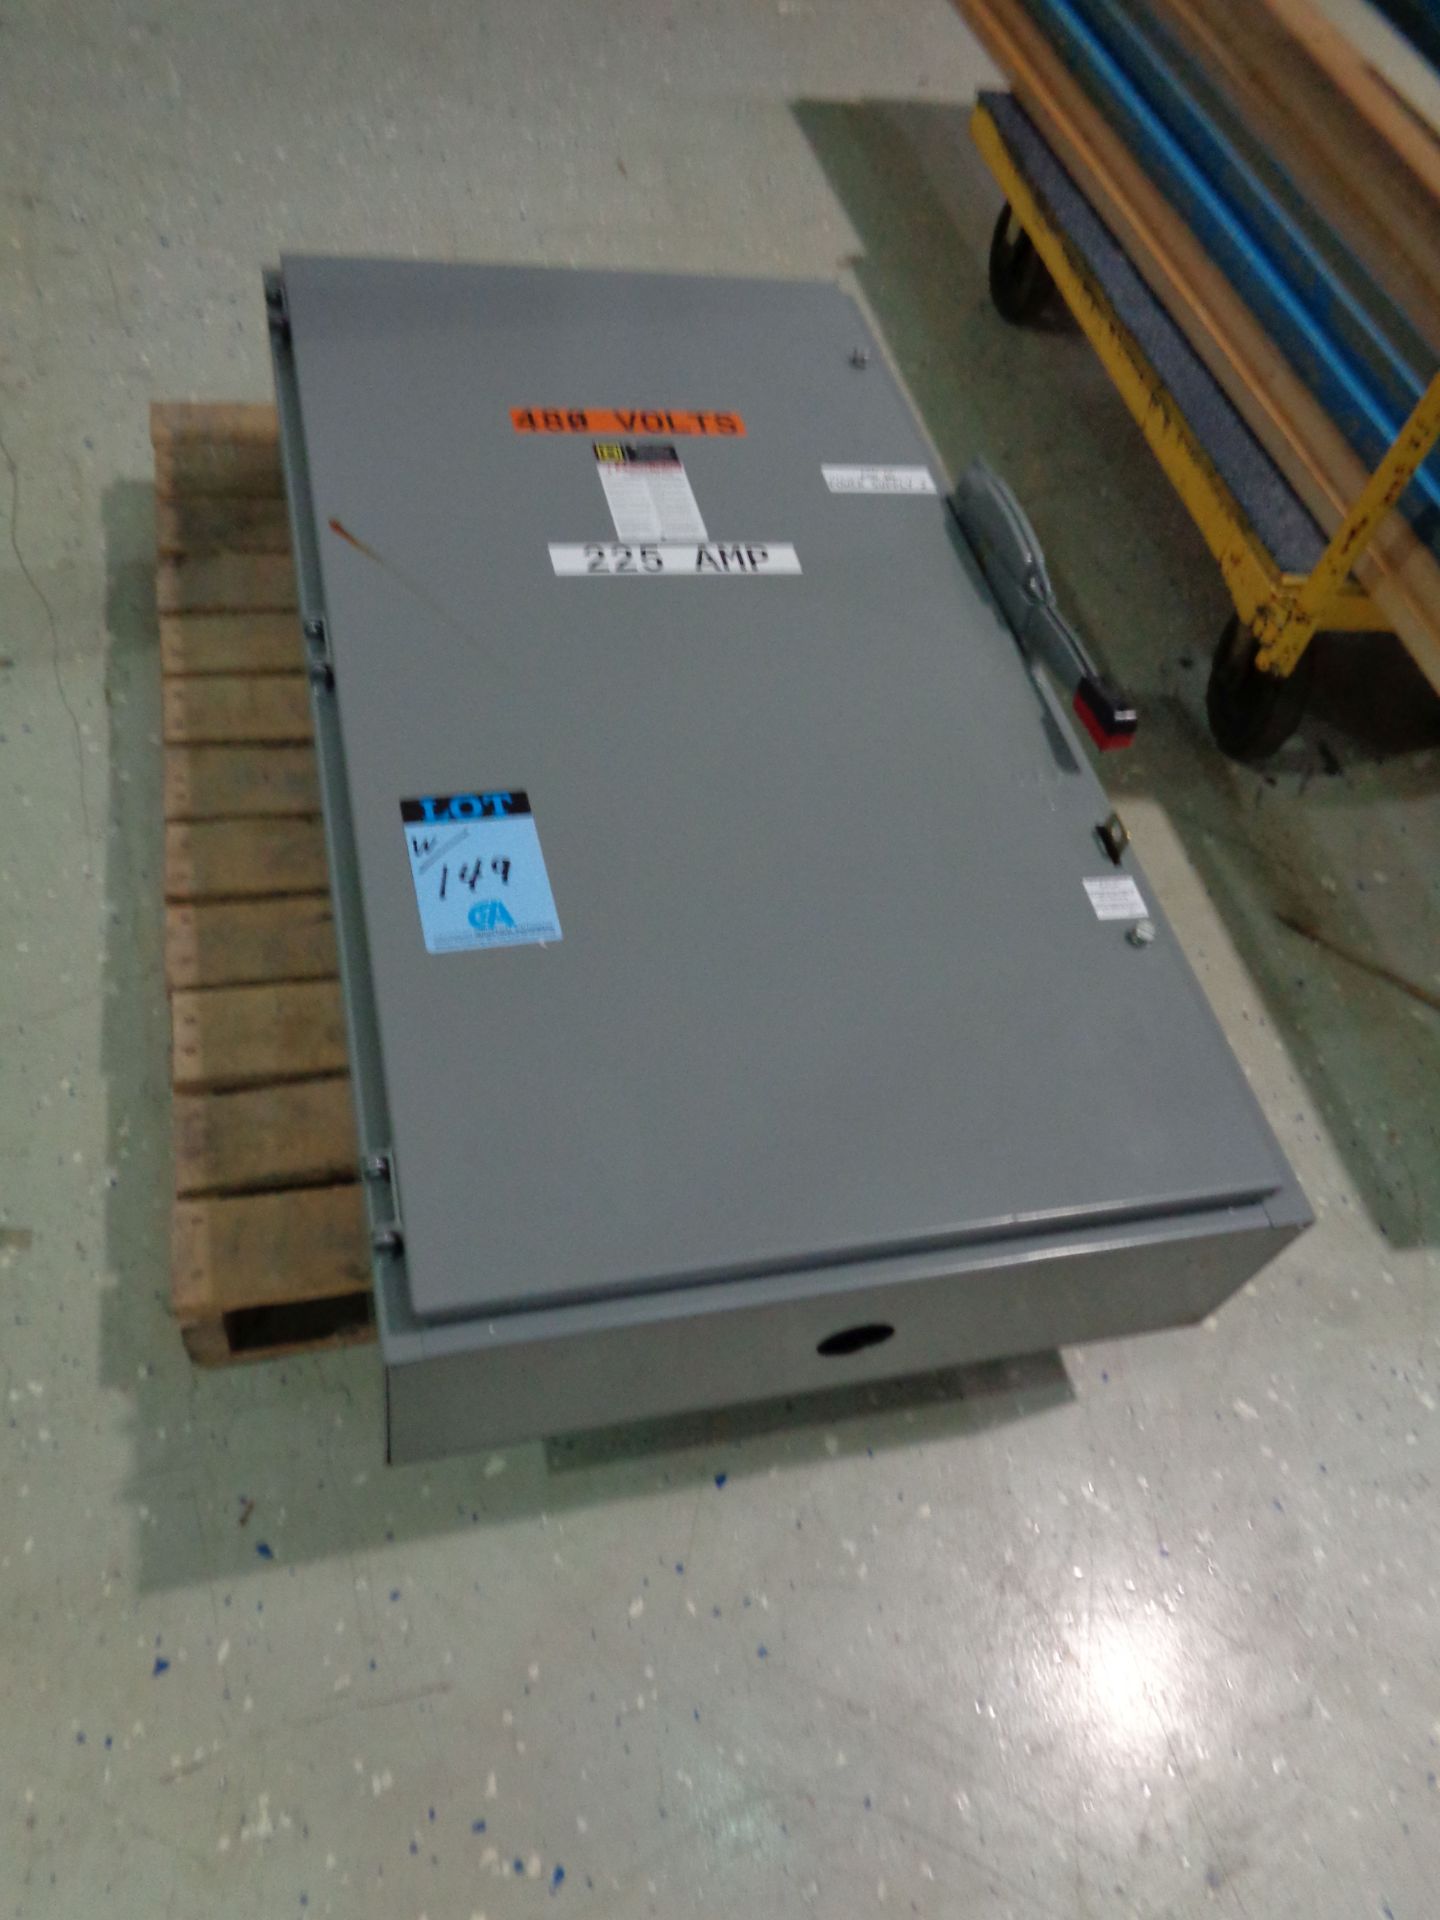 MAGMA POWER MODEL MTD 800-360 INTERGRATED AC POWER SUPPLIES; S/N 1071-1618, 1071-1684 AND N/A, - Image 4 of 4